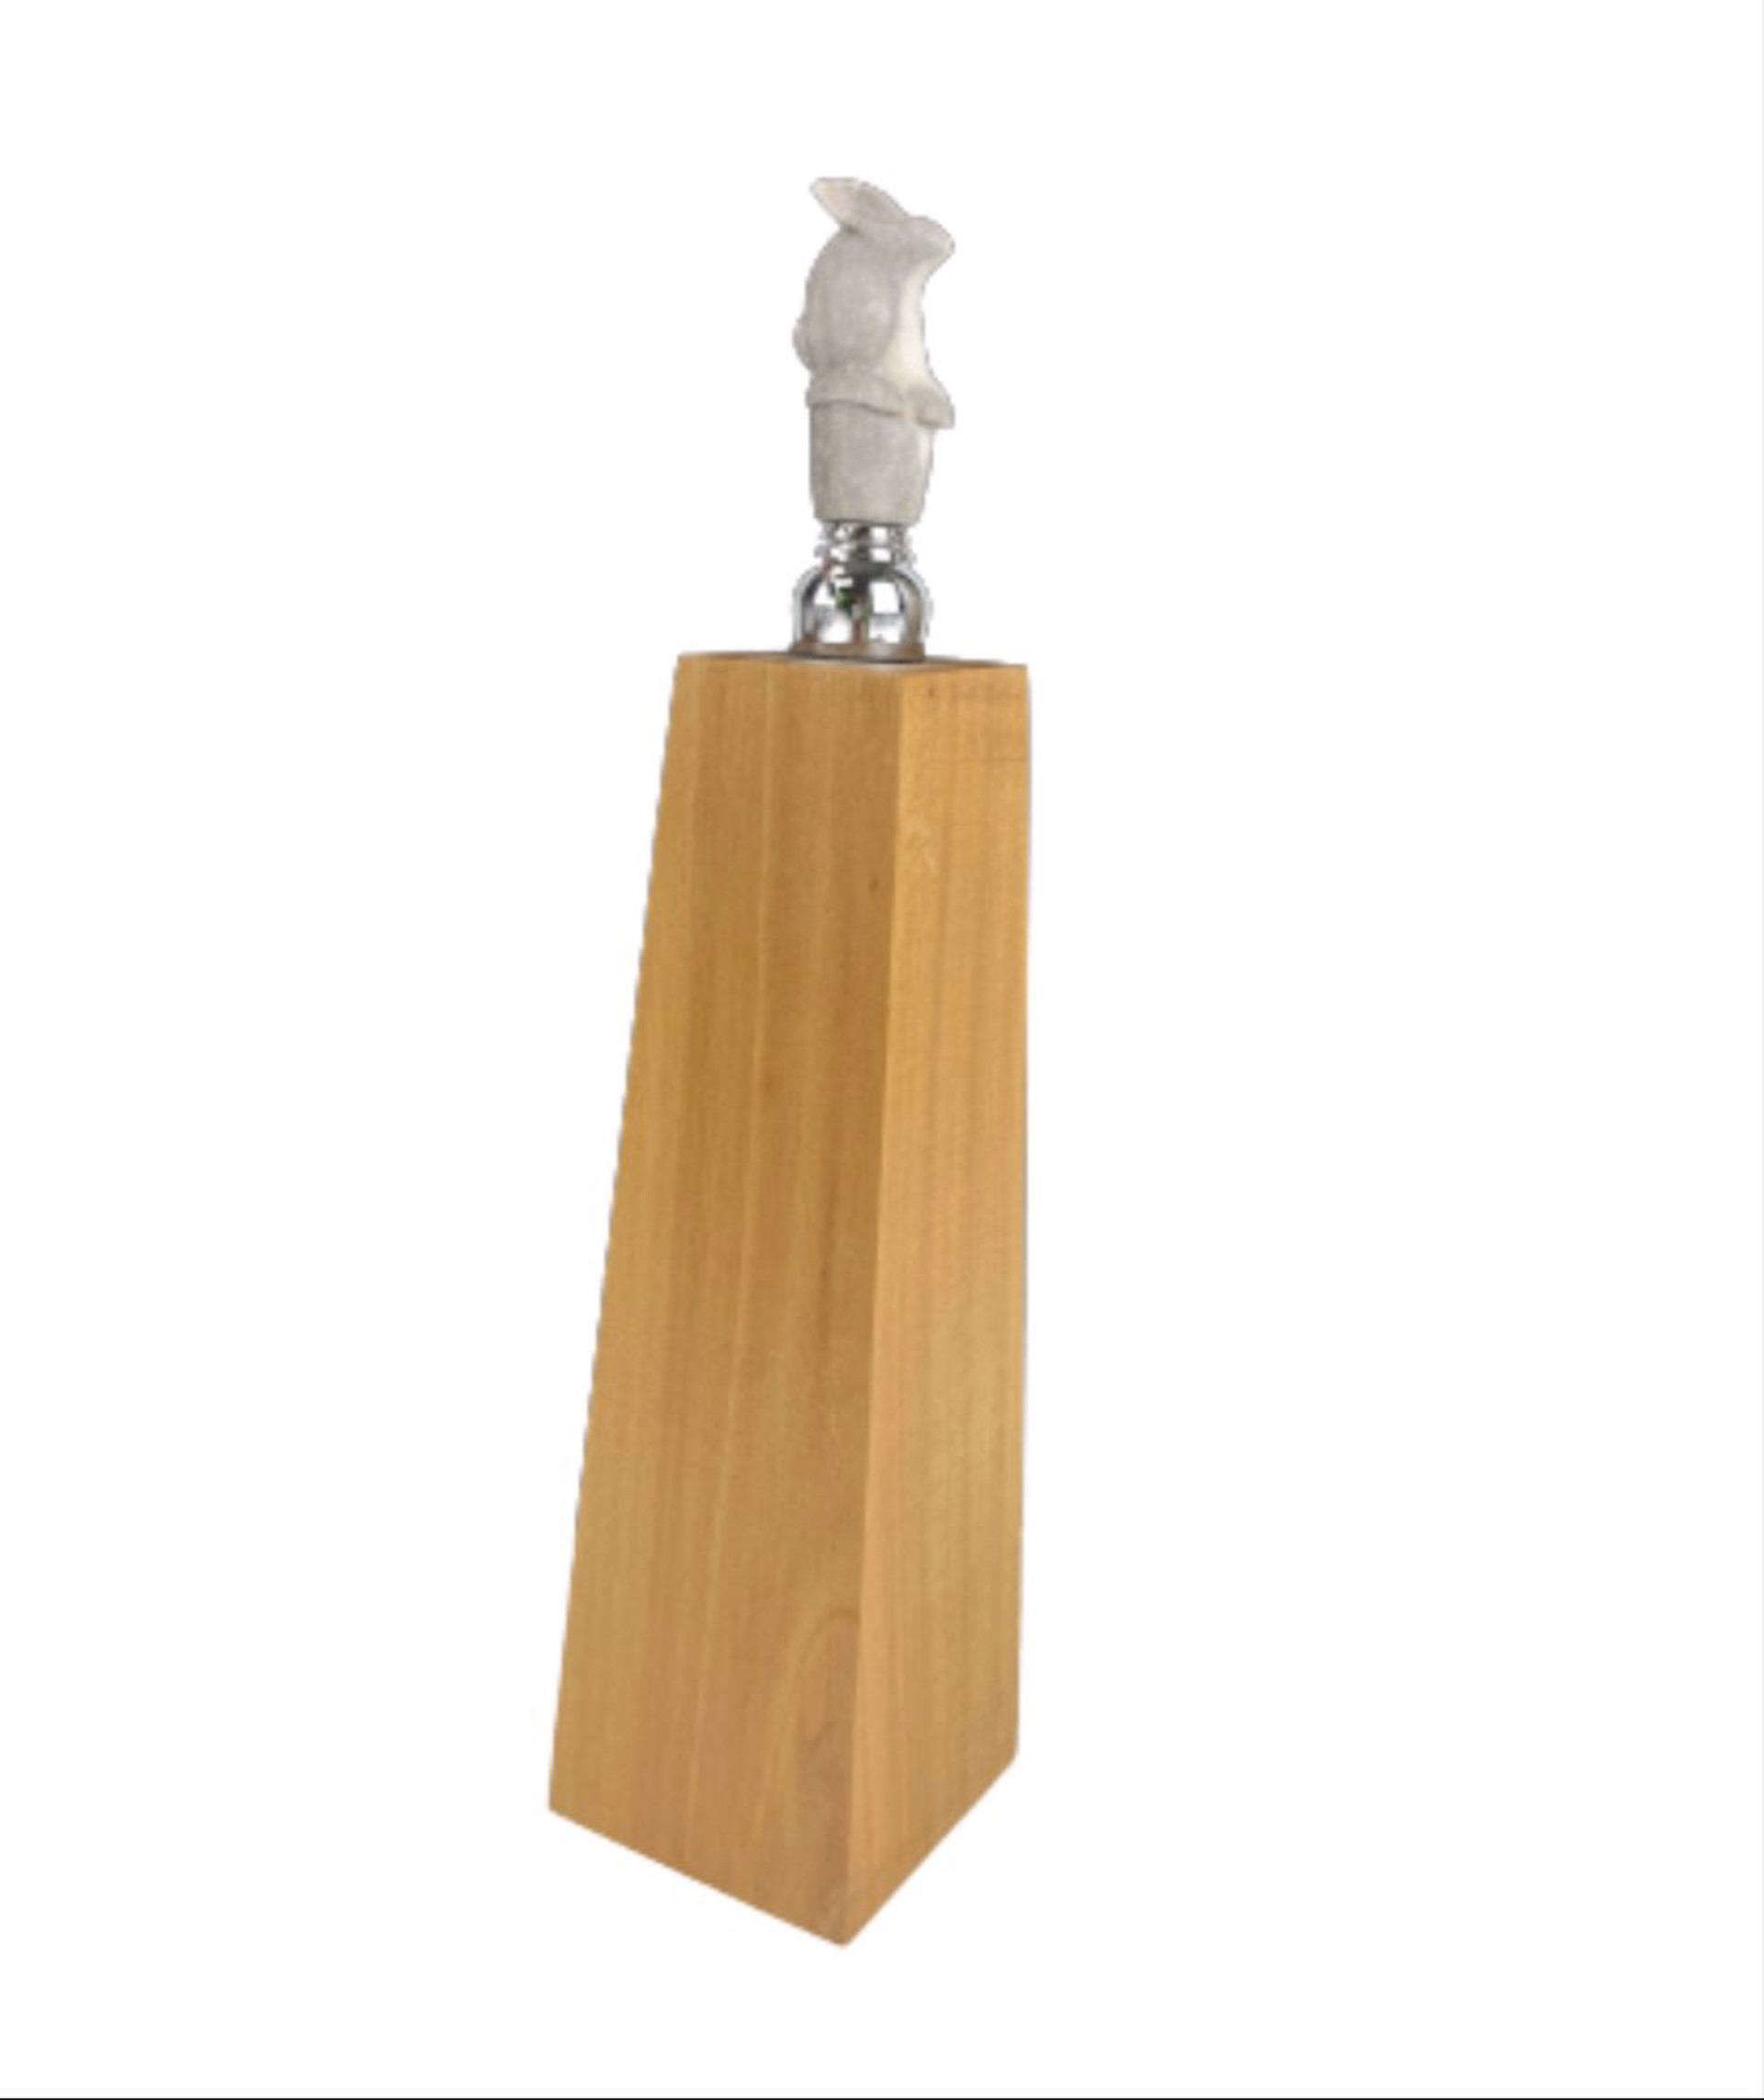 Bunny Wine Stopper with Stand by Traci Rhoades